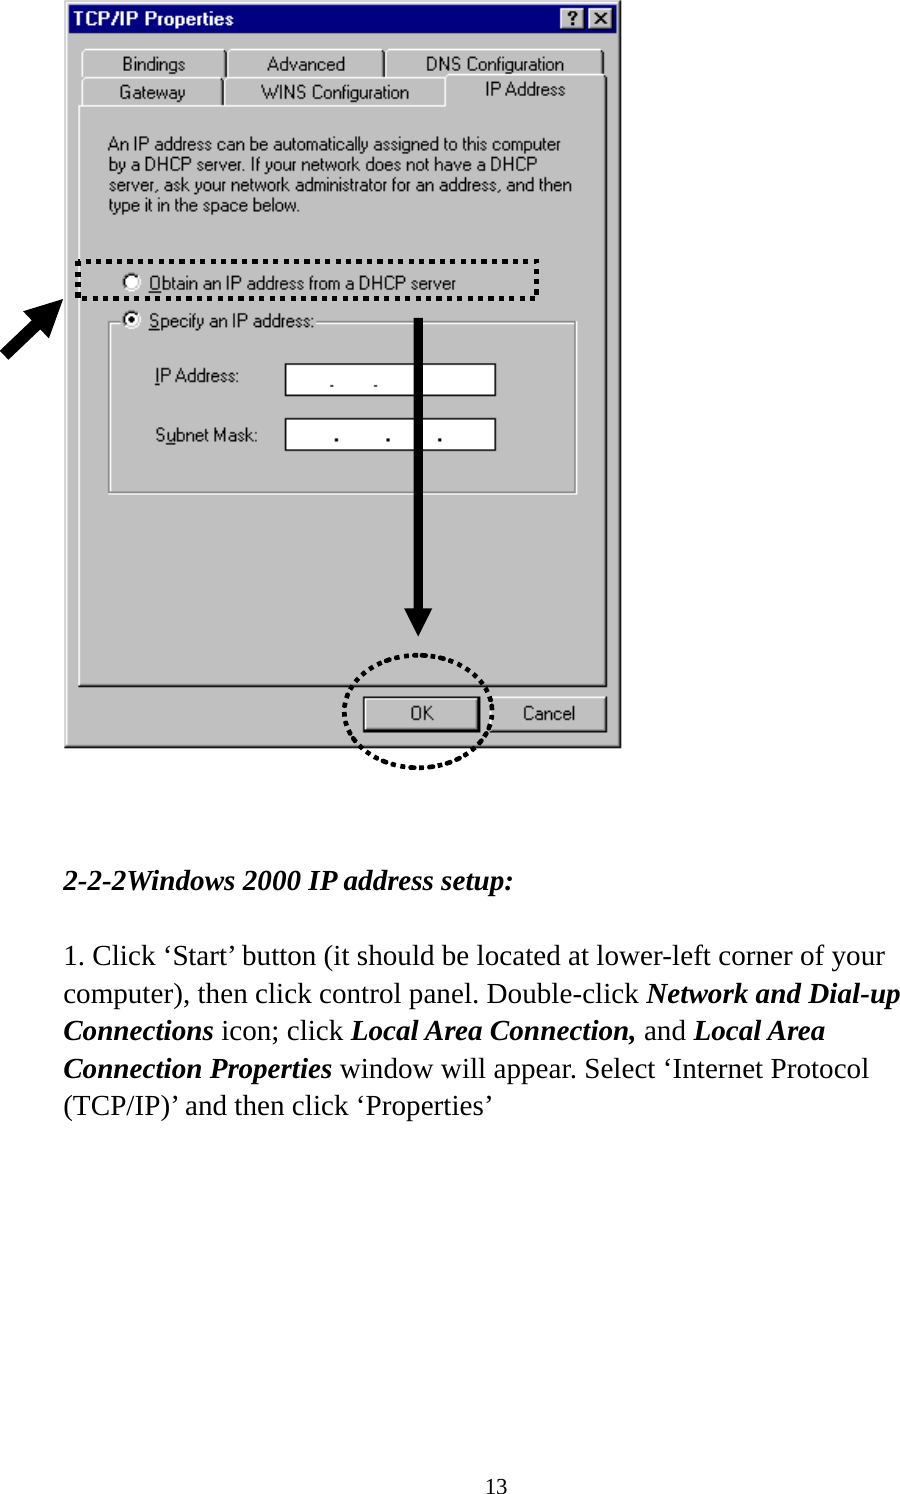 13     2-2-2Windows 2000 IP address setup:  1. Click ‘Start’ button (it should be located at lower-left corner of your computer), then click control panel. Double-click Network and Dial-up Connections icon; click Local Area Connection, and Local Area Connection Properties window will appear. Select ‘Internet Protocol (TCP/IP)’ and then click ‘Properties’    